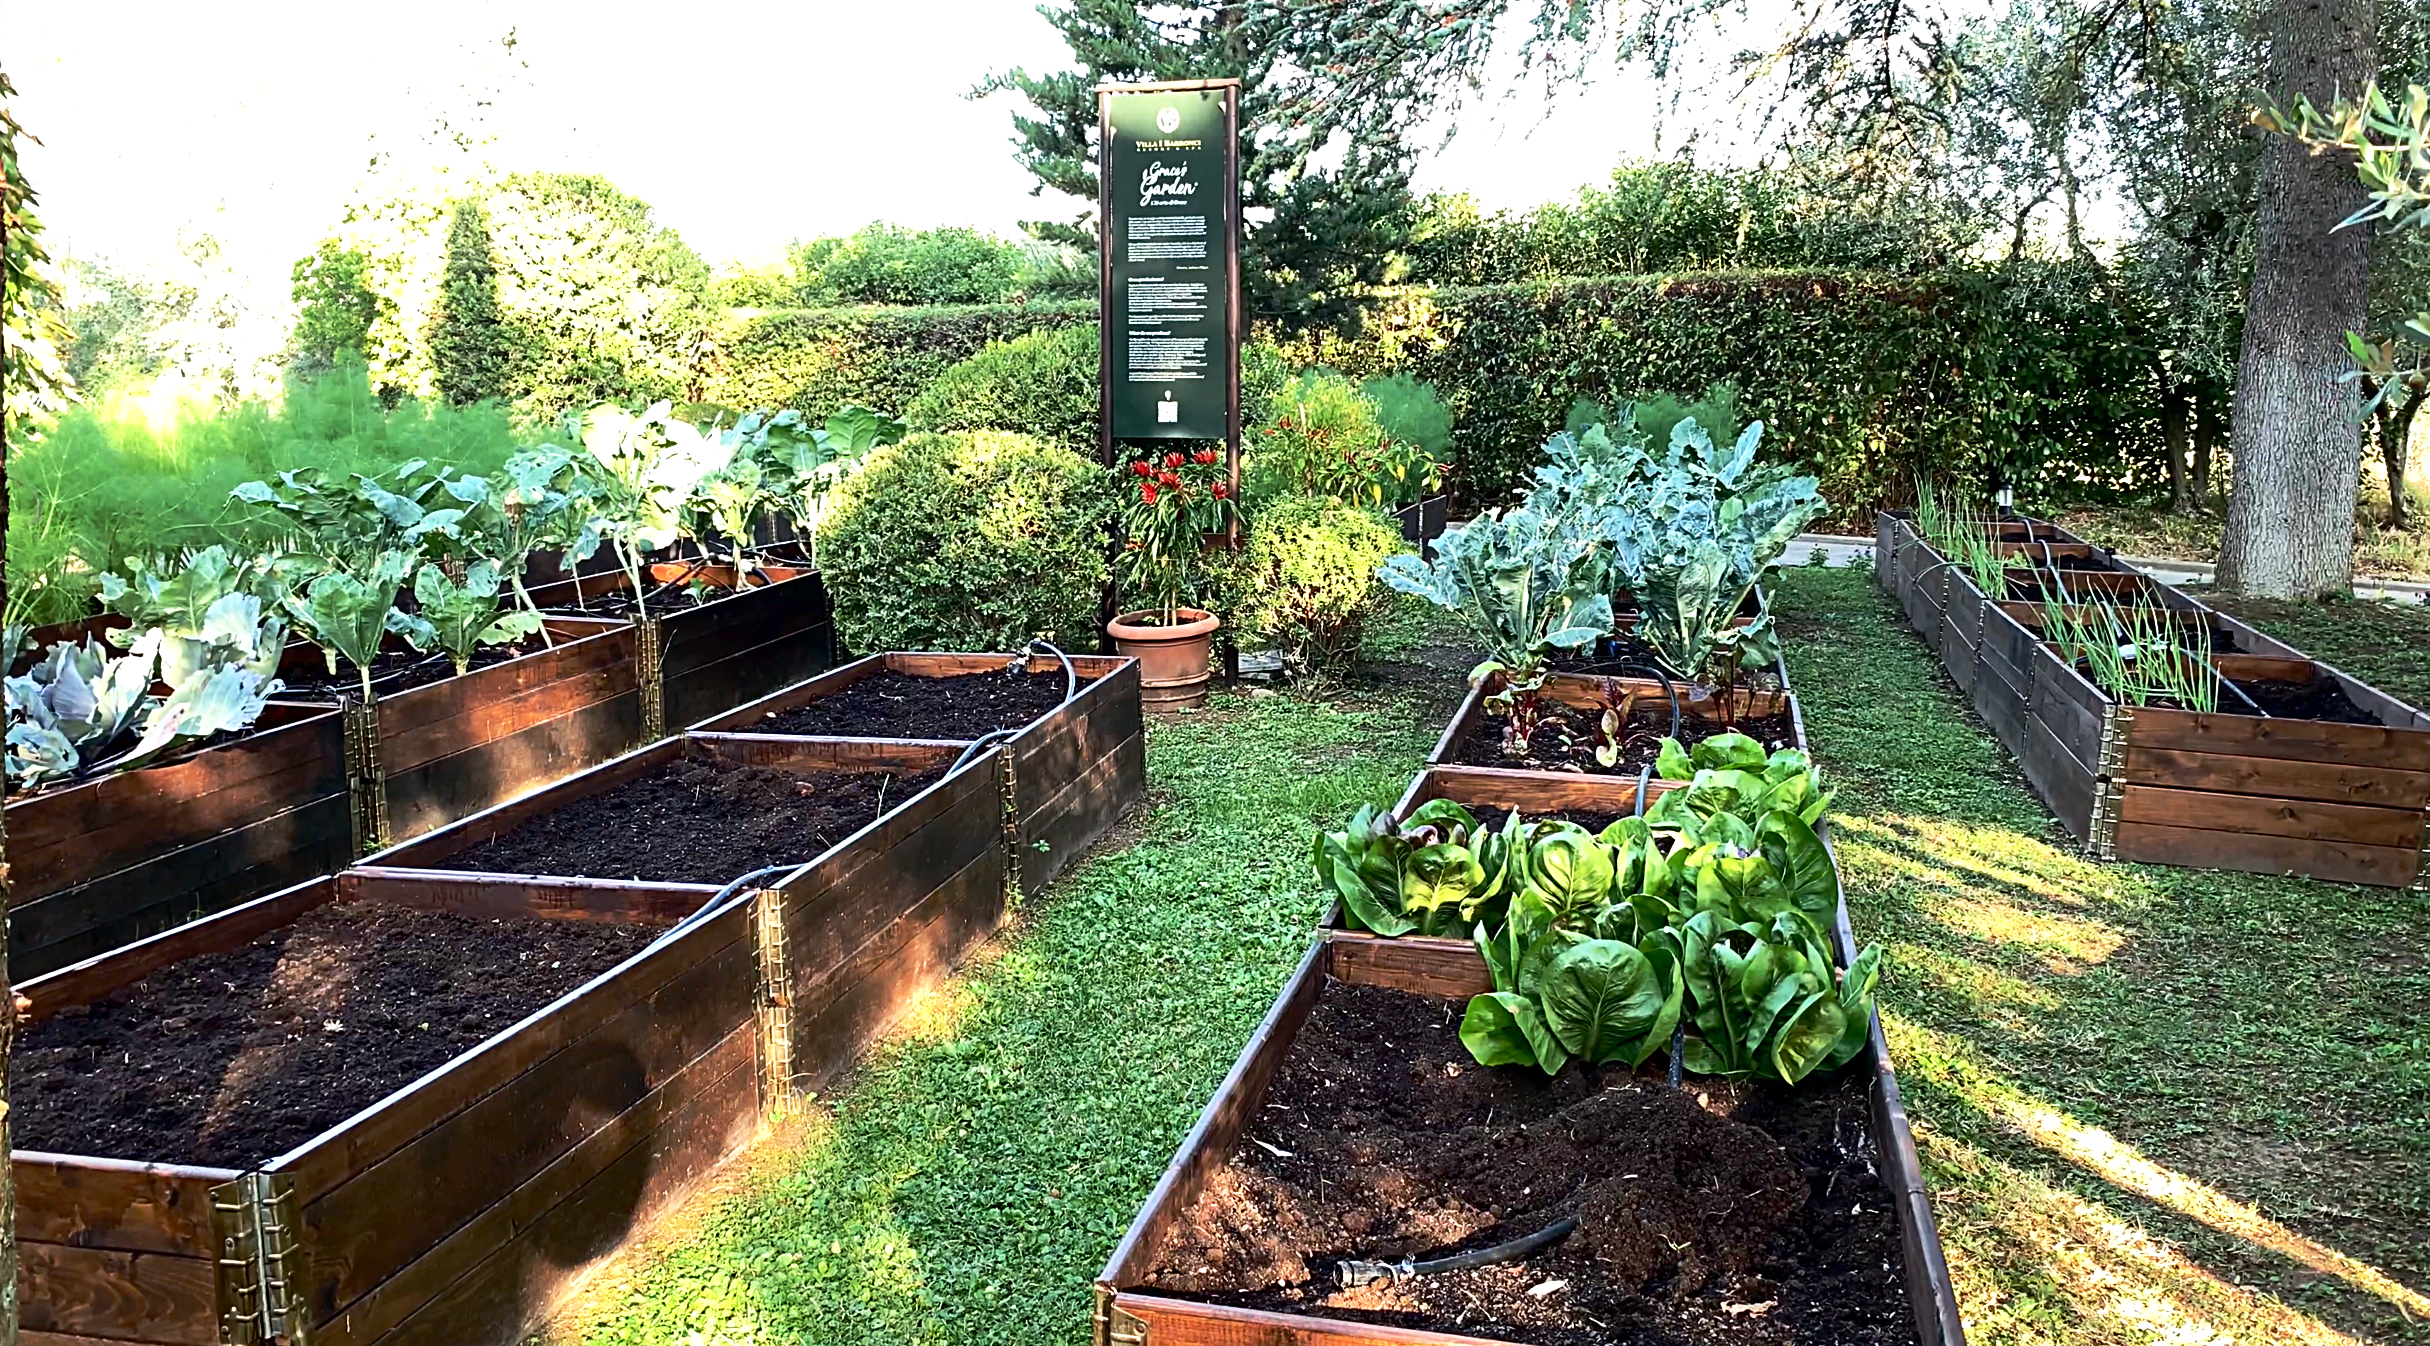  The hotel’s kitchen garden. We savoured some produce from here both nights we ate in the restaurant.  